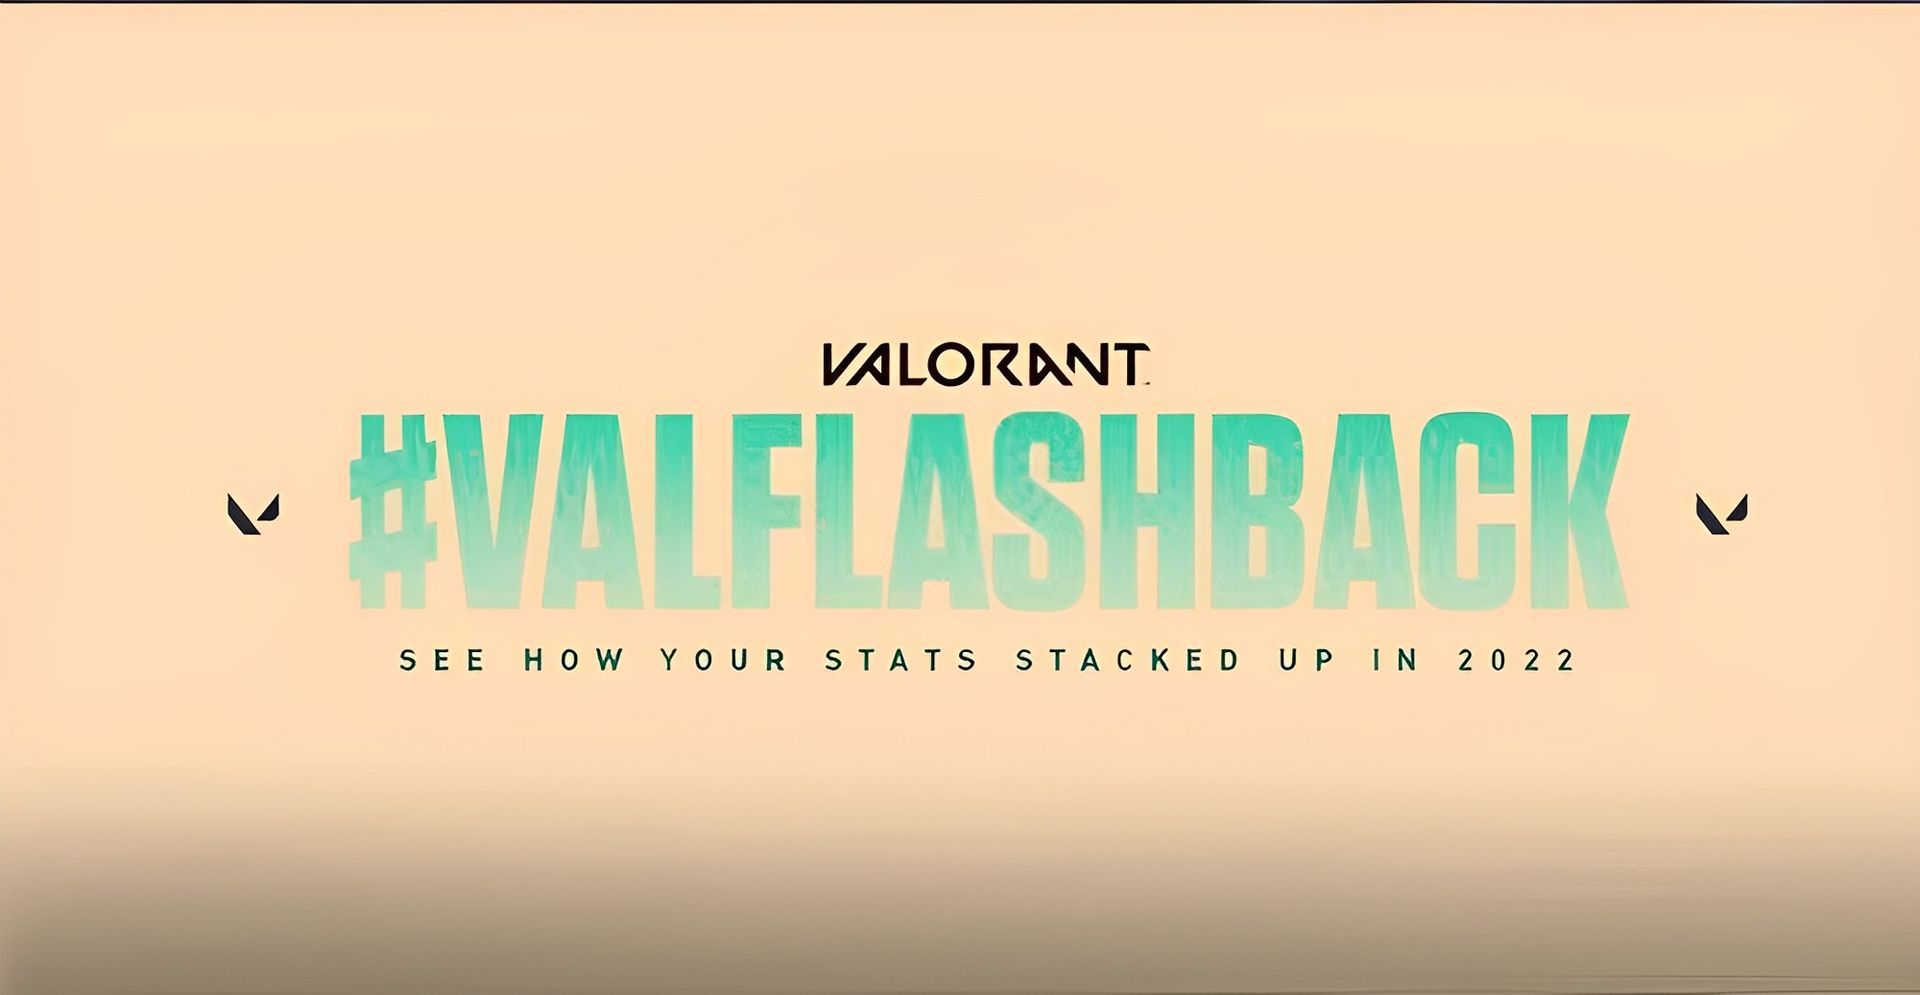 So many gamers have been having the Valorant Flashback email issue which causes you to not get a recap mail even though you opted in before the deadline. We...